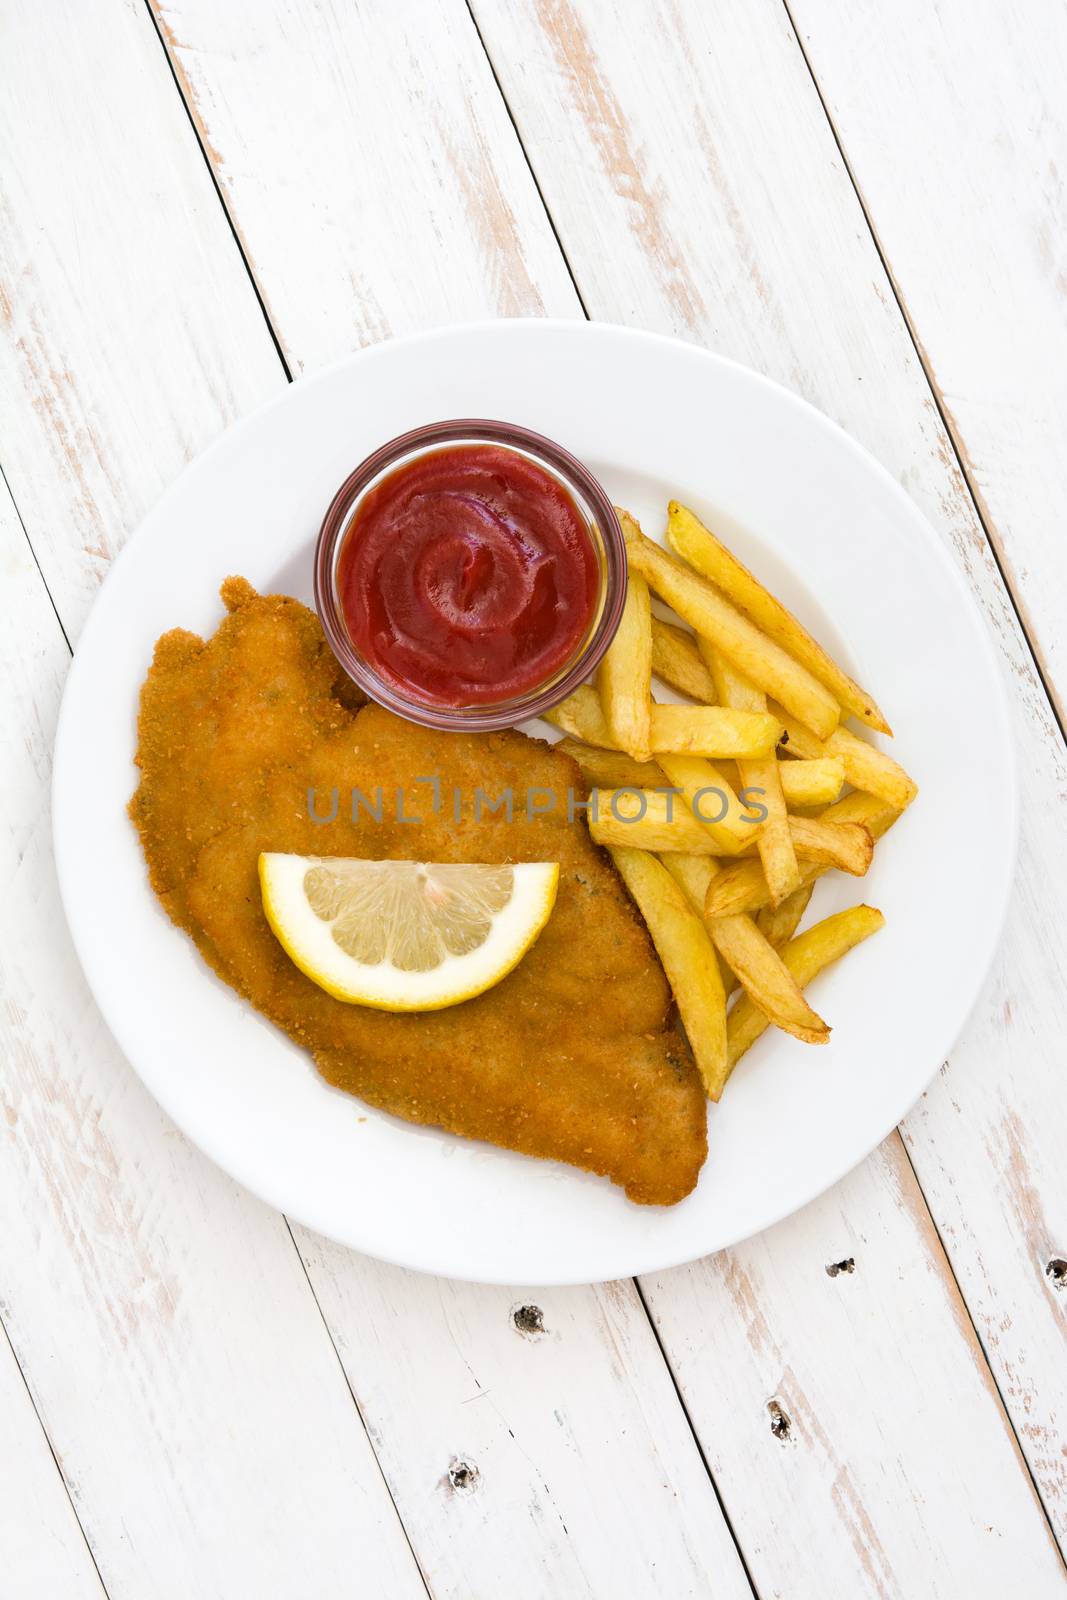 Wiener schnitzel with fried potatoes on white wooden background by chandlervid85